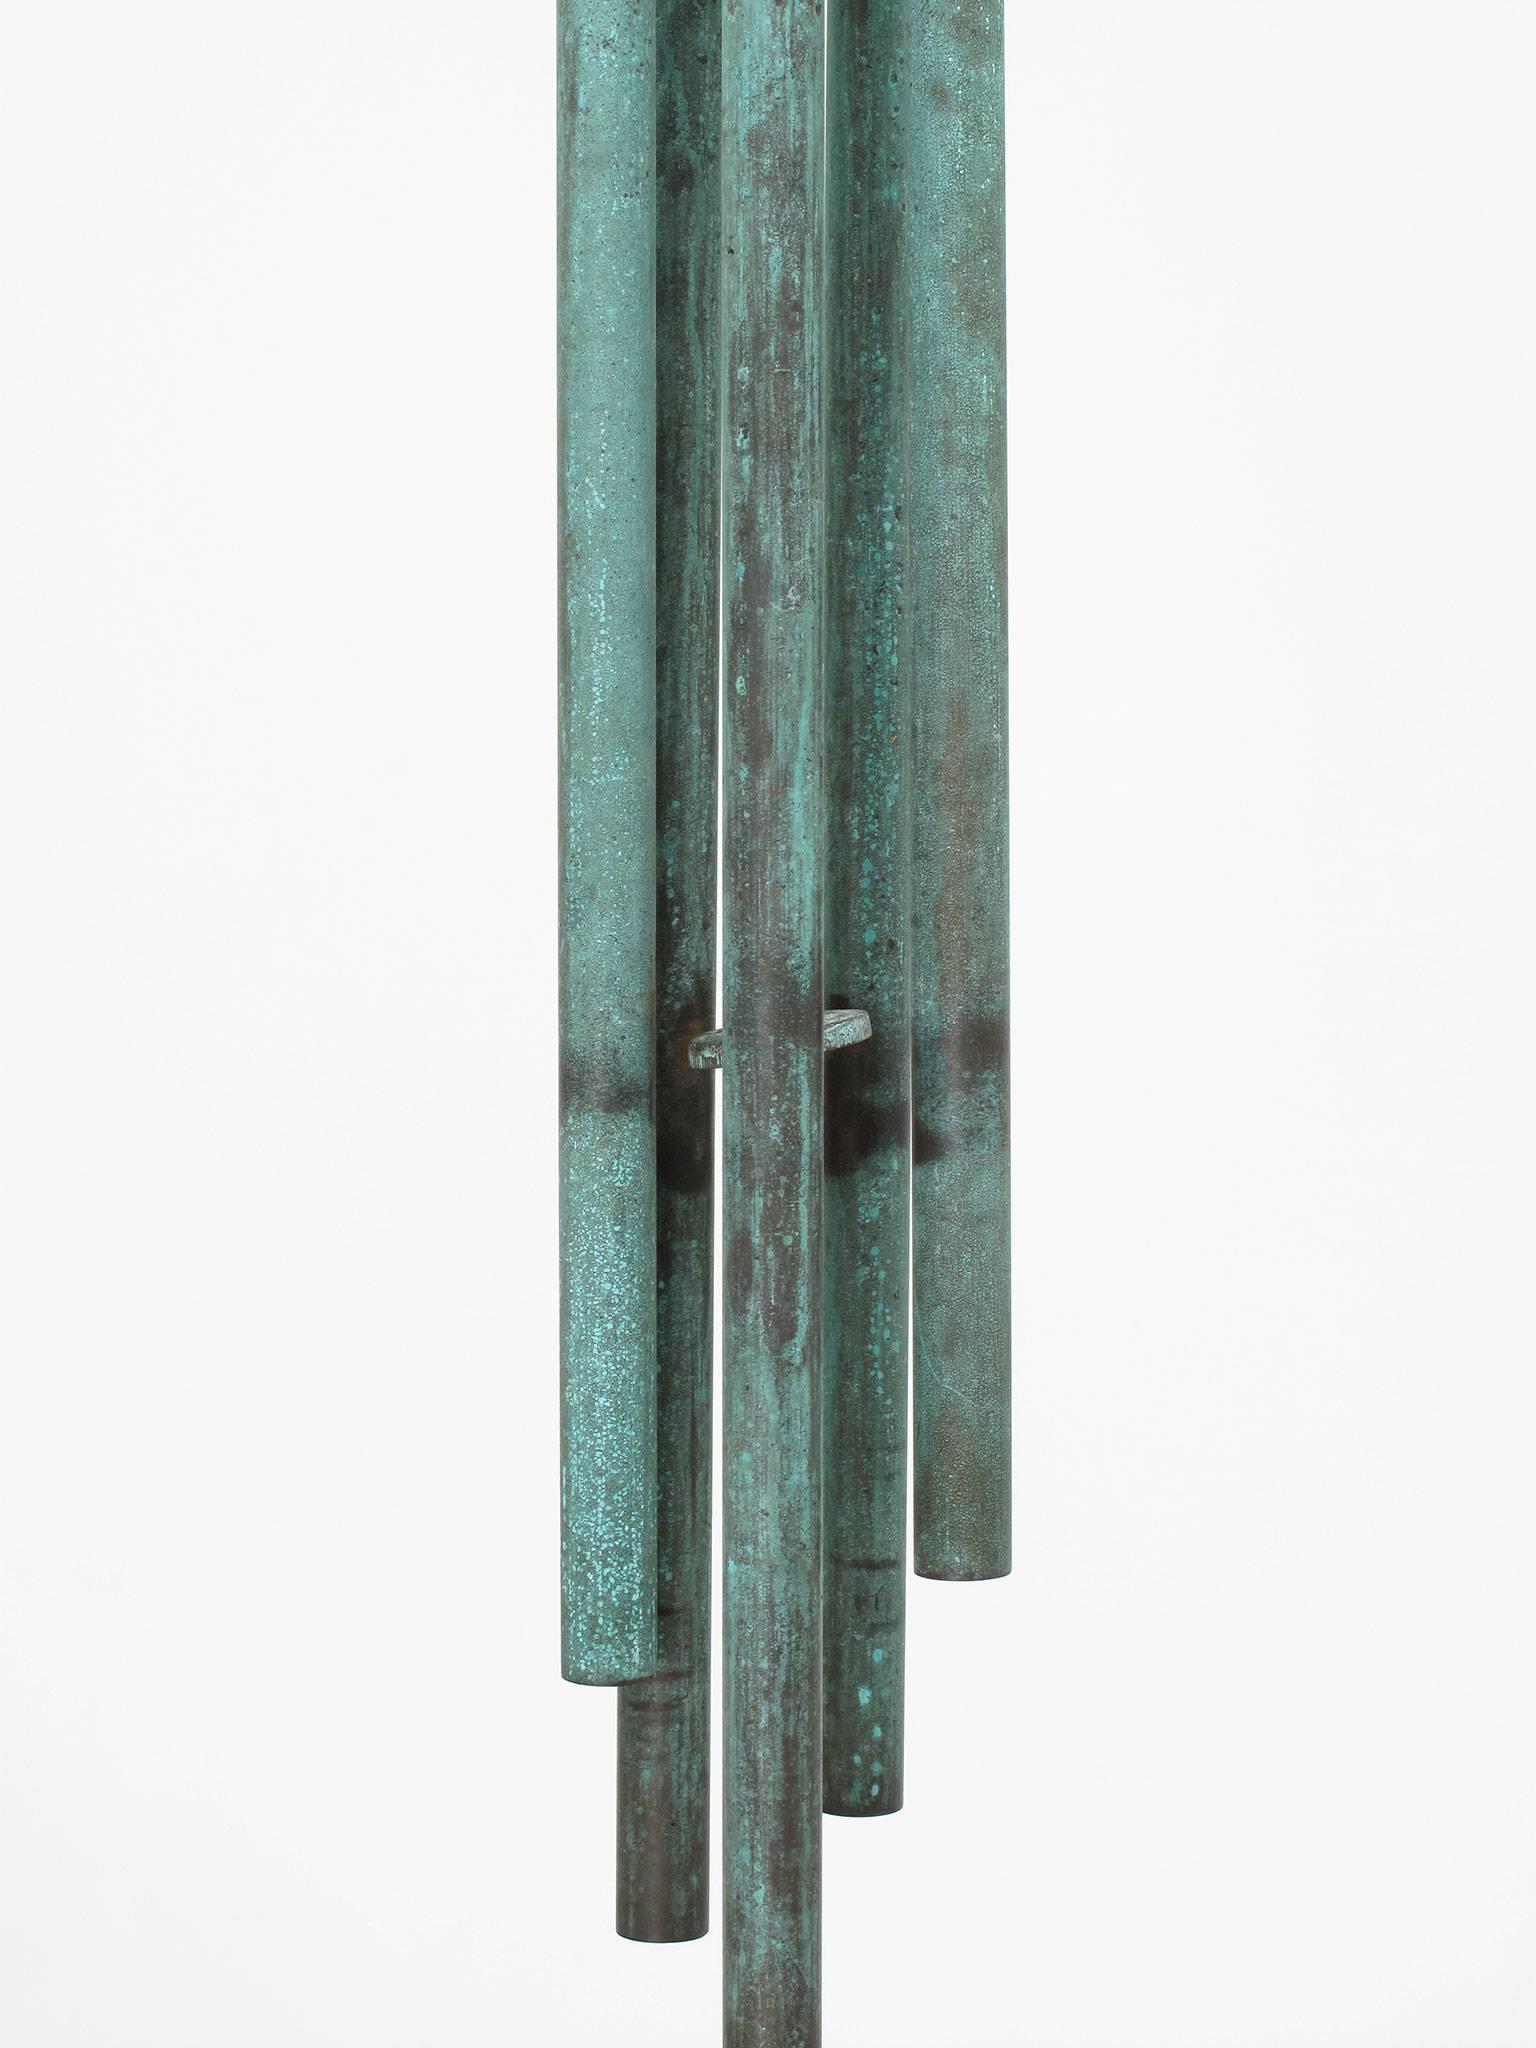 Mid-Century Modern solid brass wind chimes with a beautiful patina and creating a wonderful rich sound, measuring 29 high x 4 diameter inches.